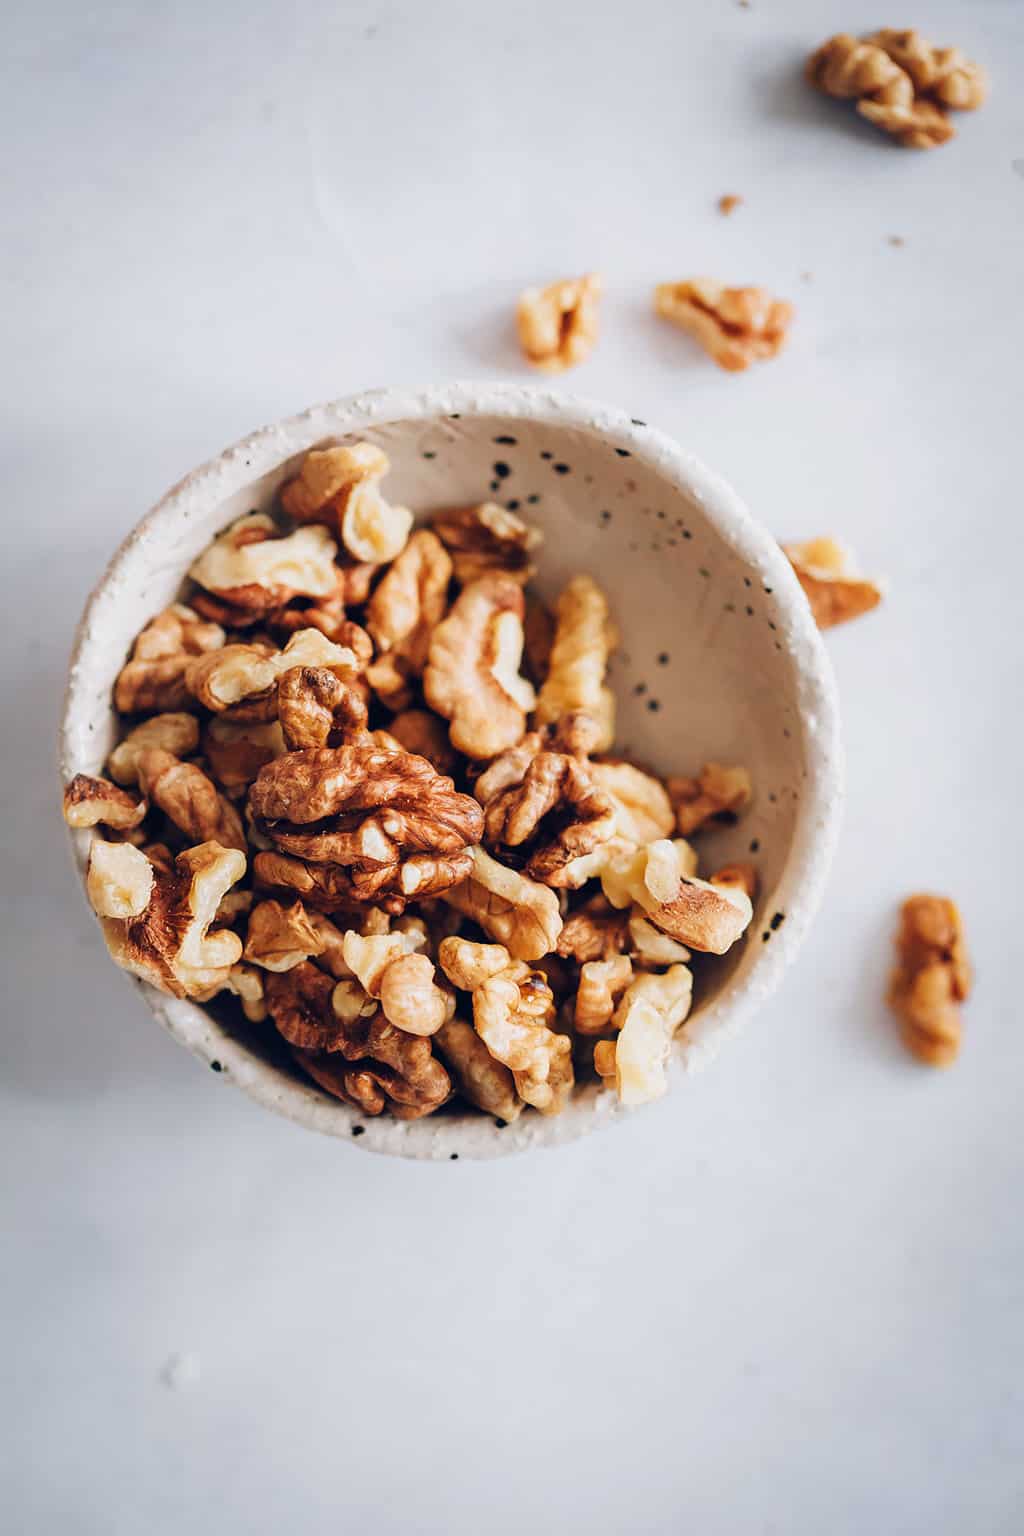 Nuts - 12 High Protein Snack Ideas